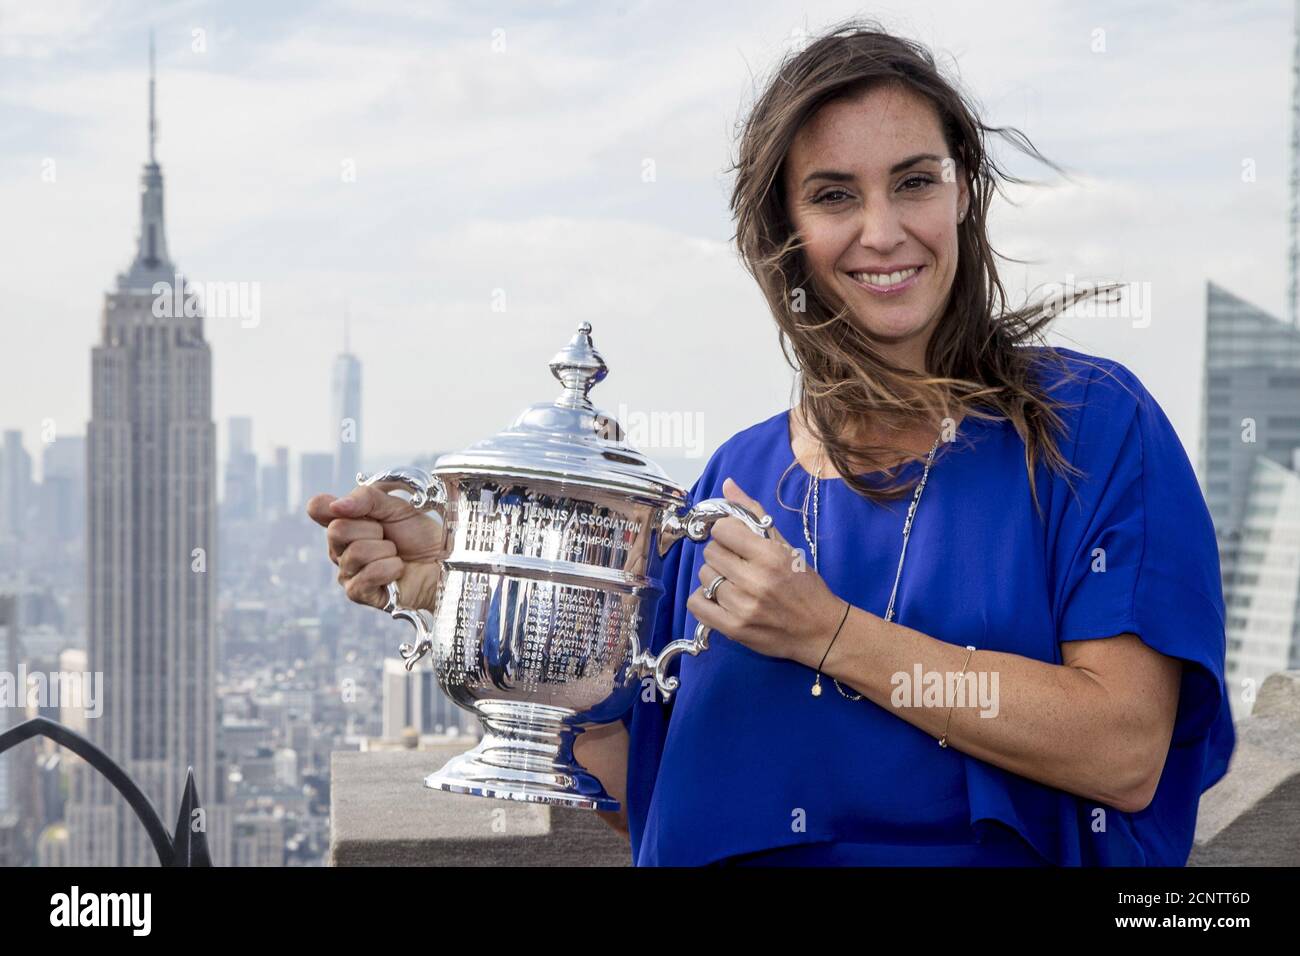 Flavia Pennetta of Italy poses with her Women's U.S. Open Tennis champion trophy at the Top of The Rock in New York, September 13, 2015. Pennetta won her first grand slam singles title over Roberta Vinci in an improbable all-Italian U.S. Open final on Saturday then added one more shock to a stunning fortnight by announcing her retirement. REUTERS/Brendan McDermid Stock Photo